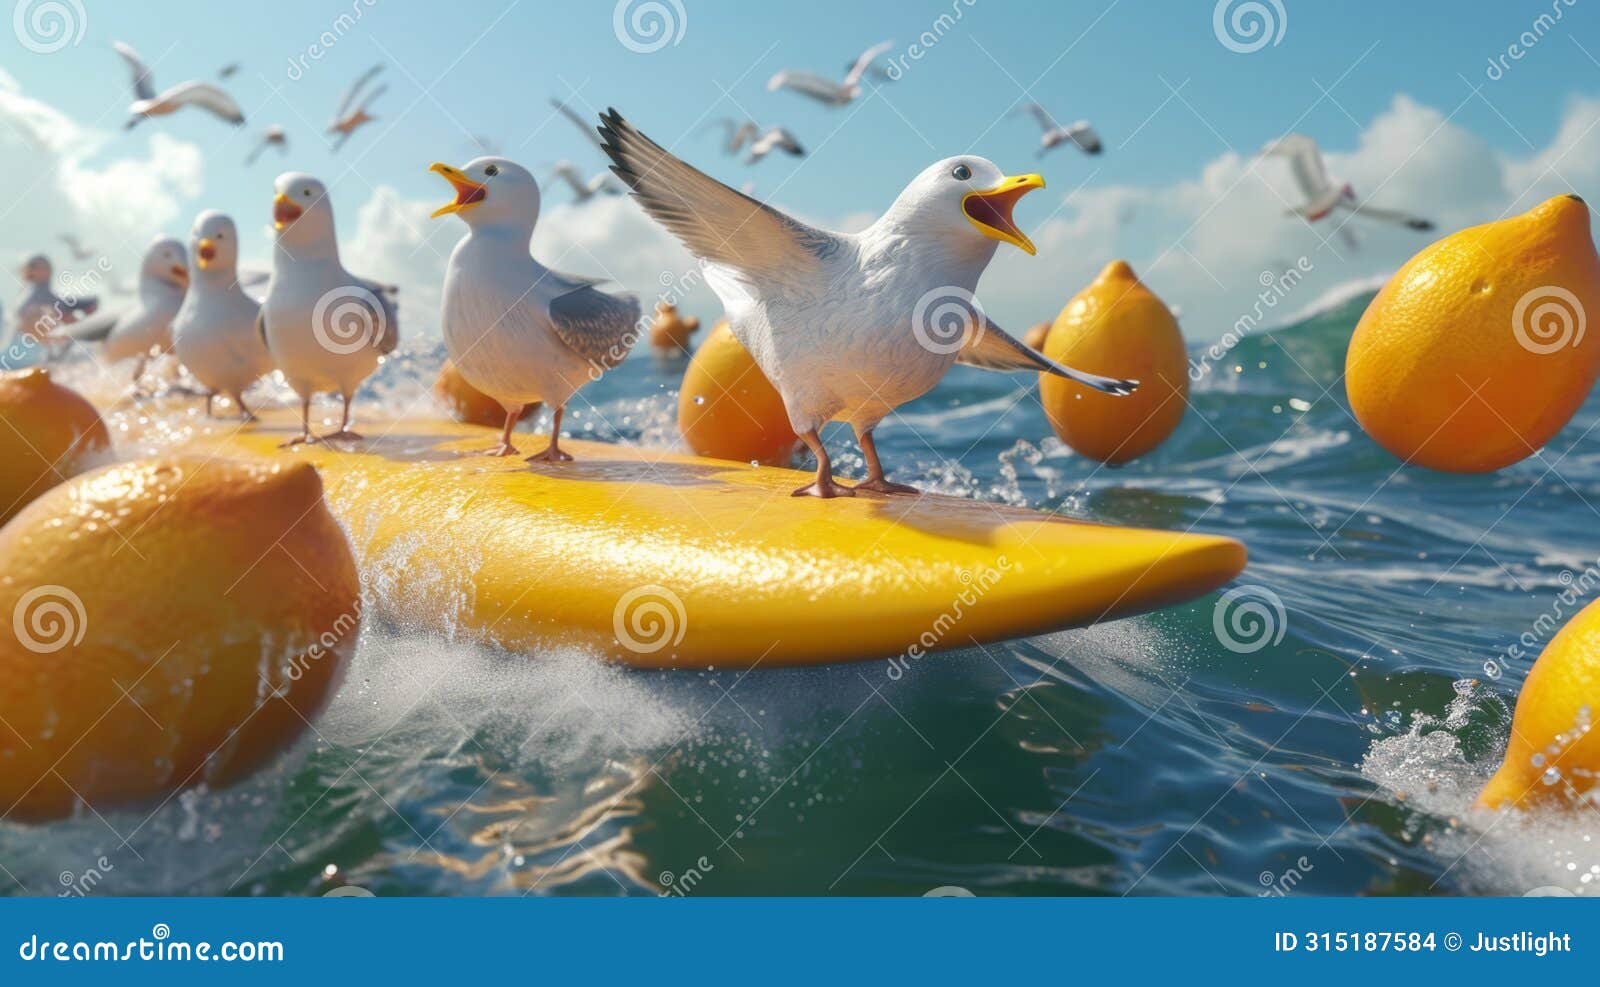 watch as a group of seagulls mistake a lemon surfboard rider for their favorite snack and hilariously try to peck at the